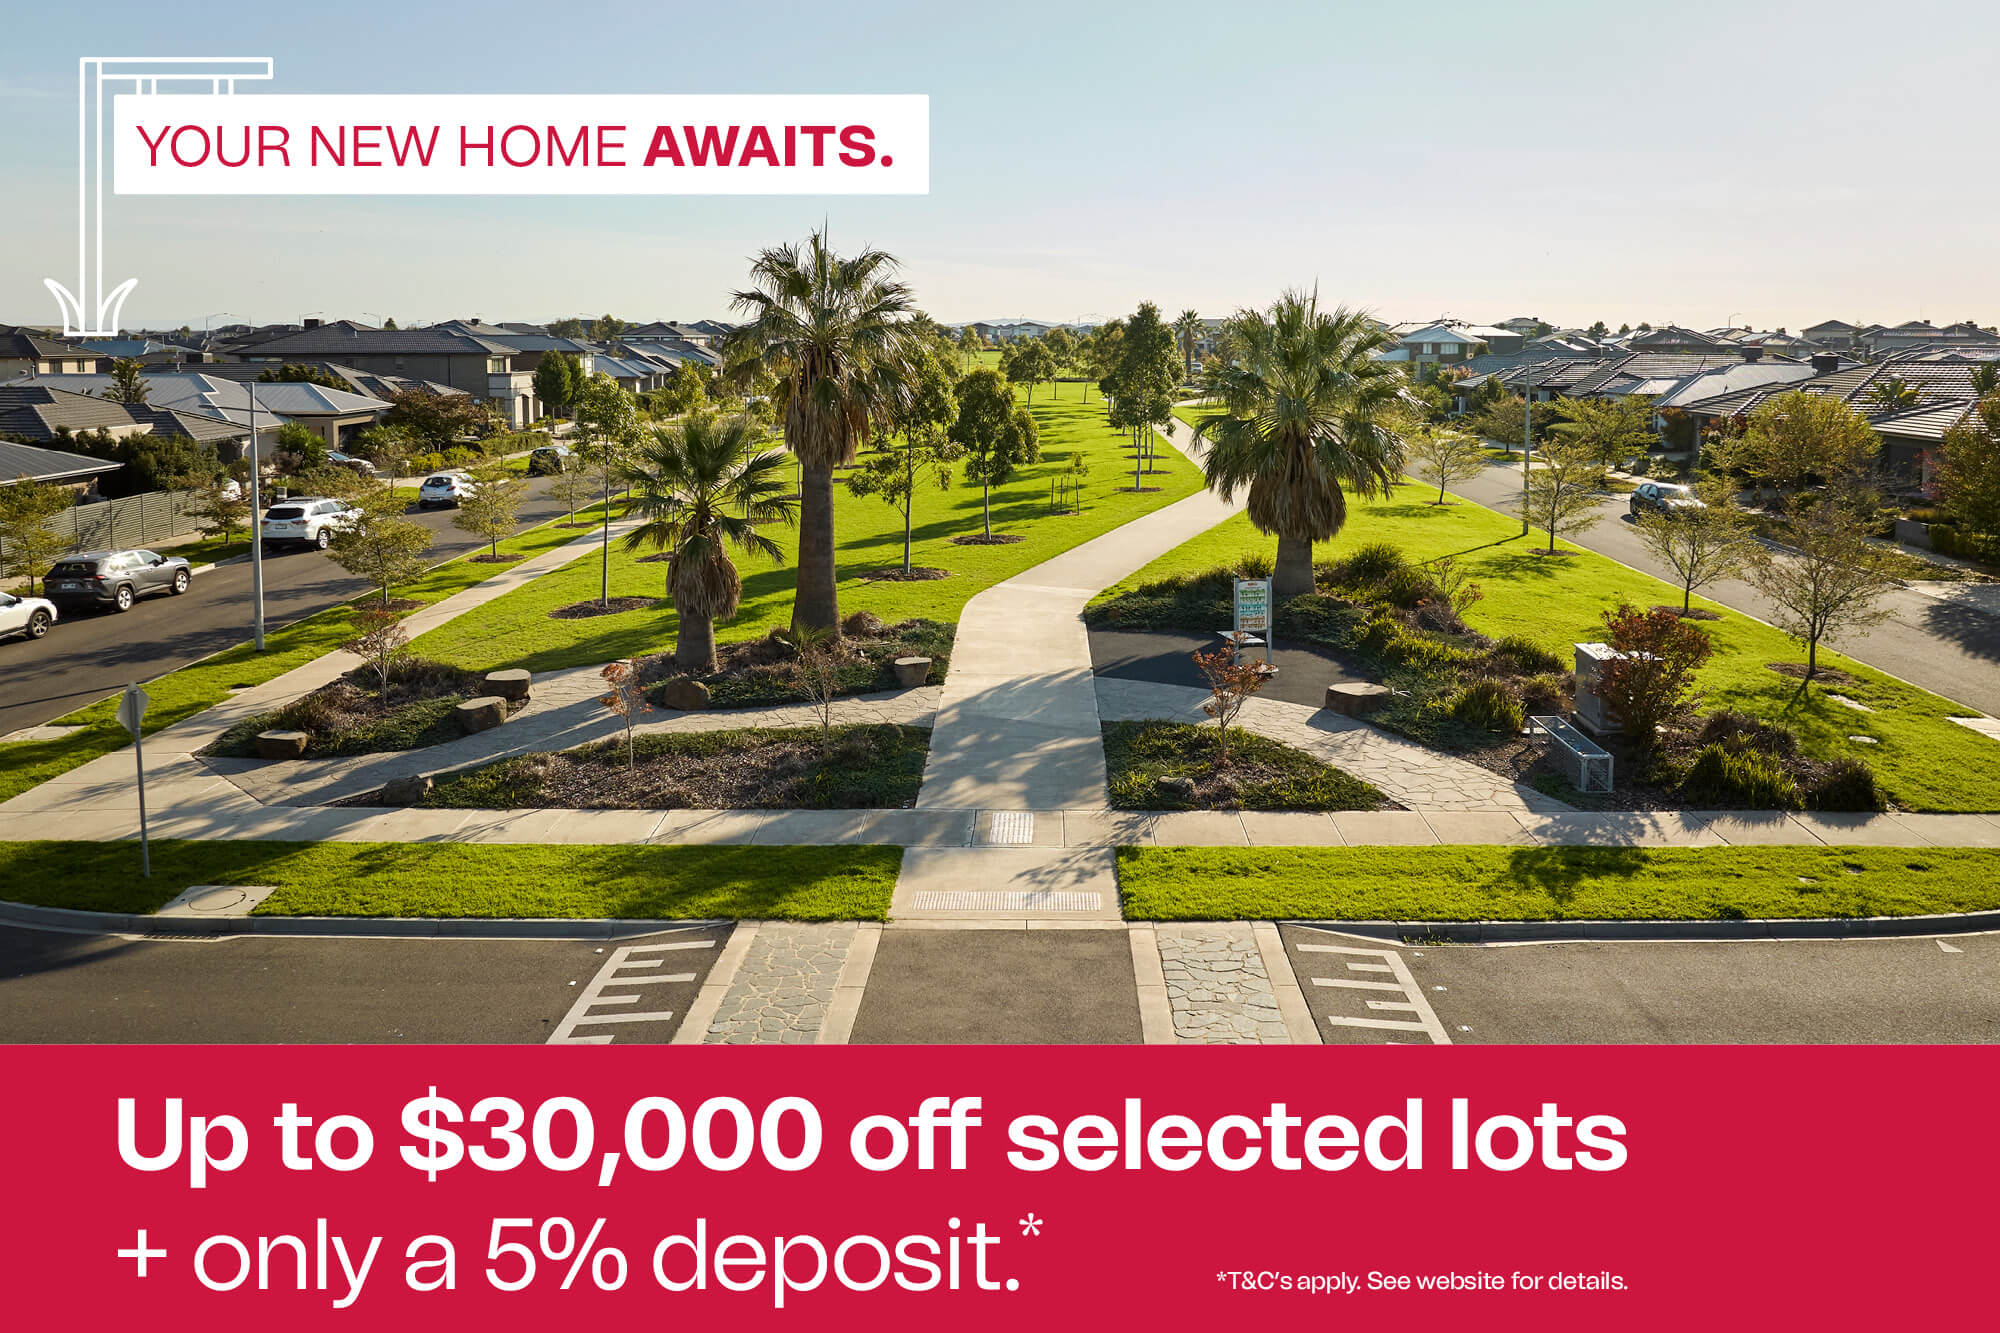 <span class="font-bold">Up to $30,000 off selected lots</span><br>+ only a 5% deposit.*